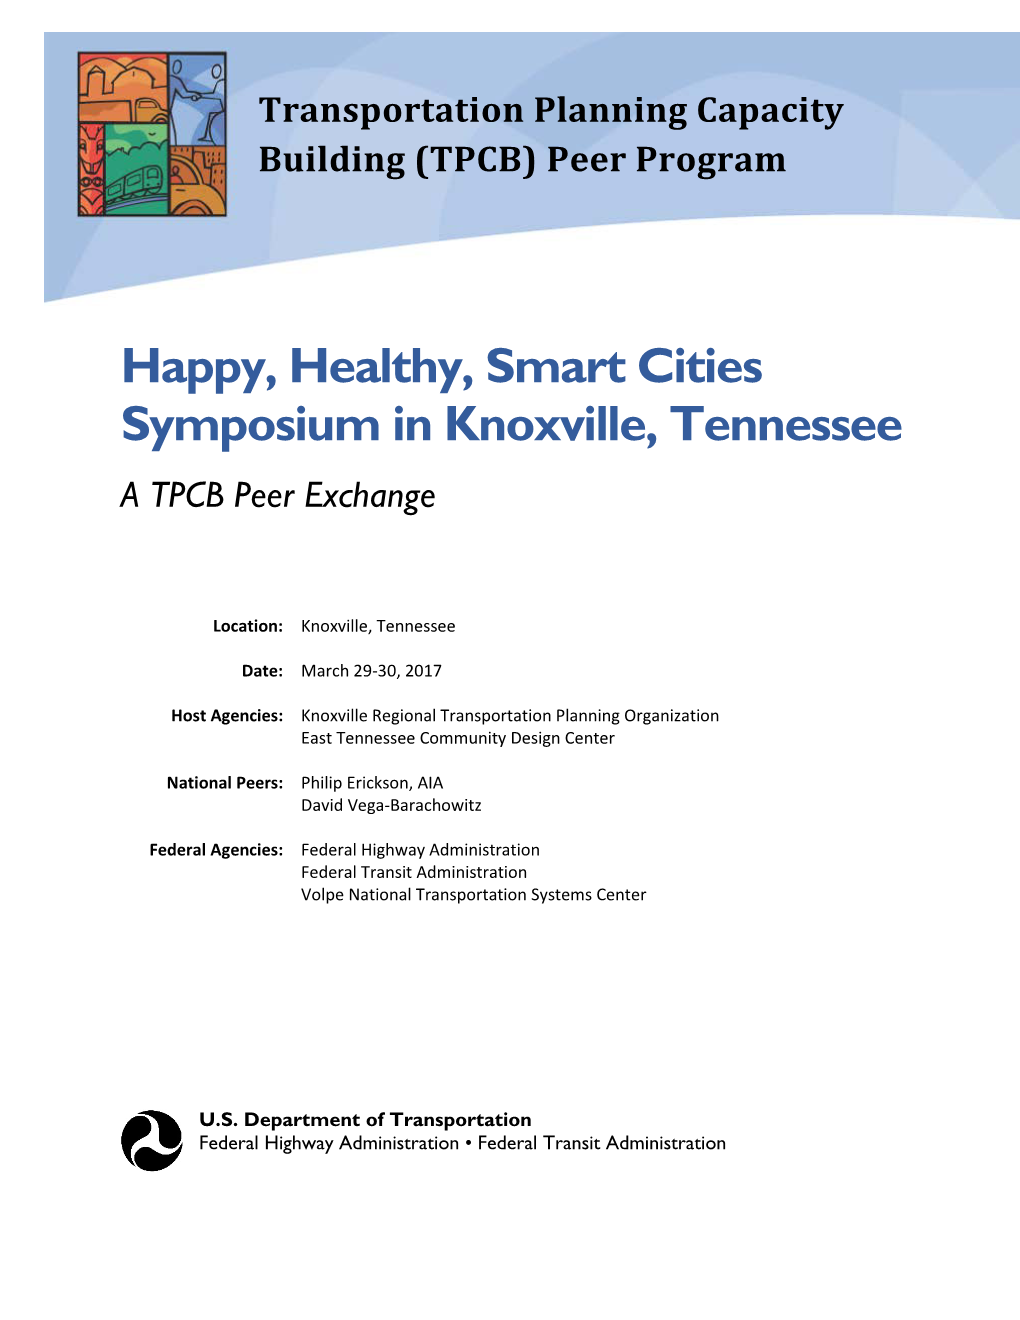 Happy, Healthy, Smart Cities Symposium in Knoxville, Tennessee a TPCB Peer Exchange